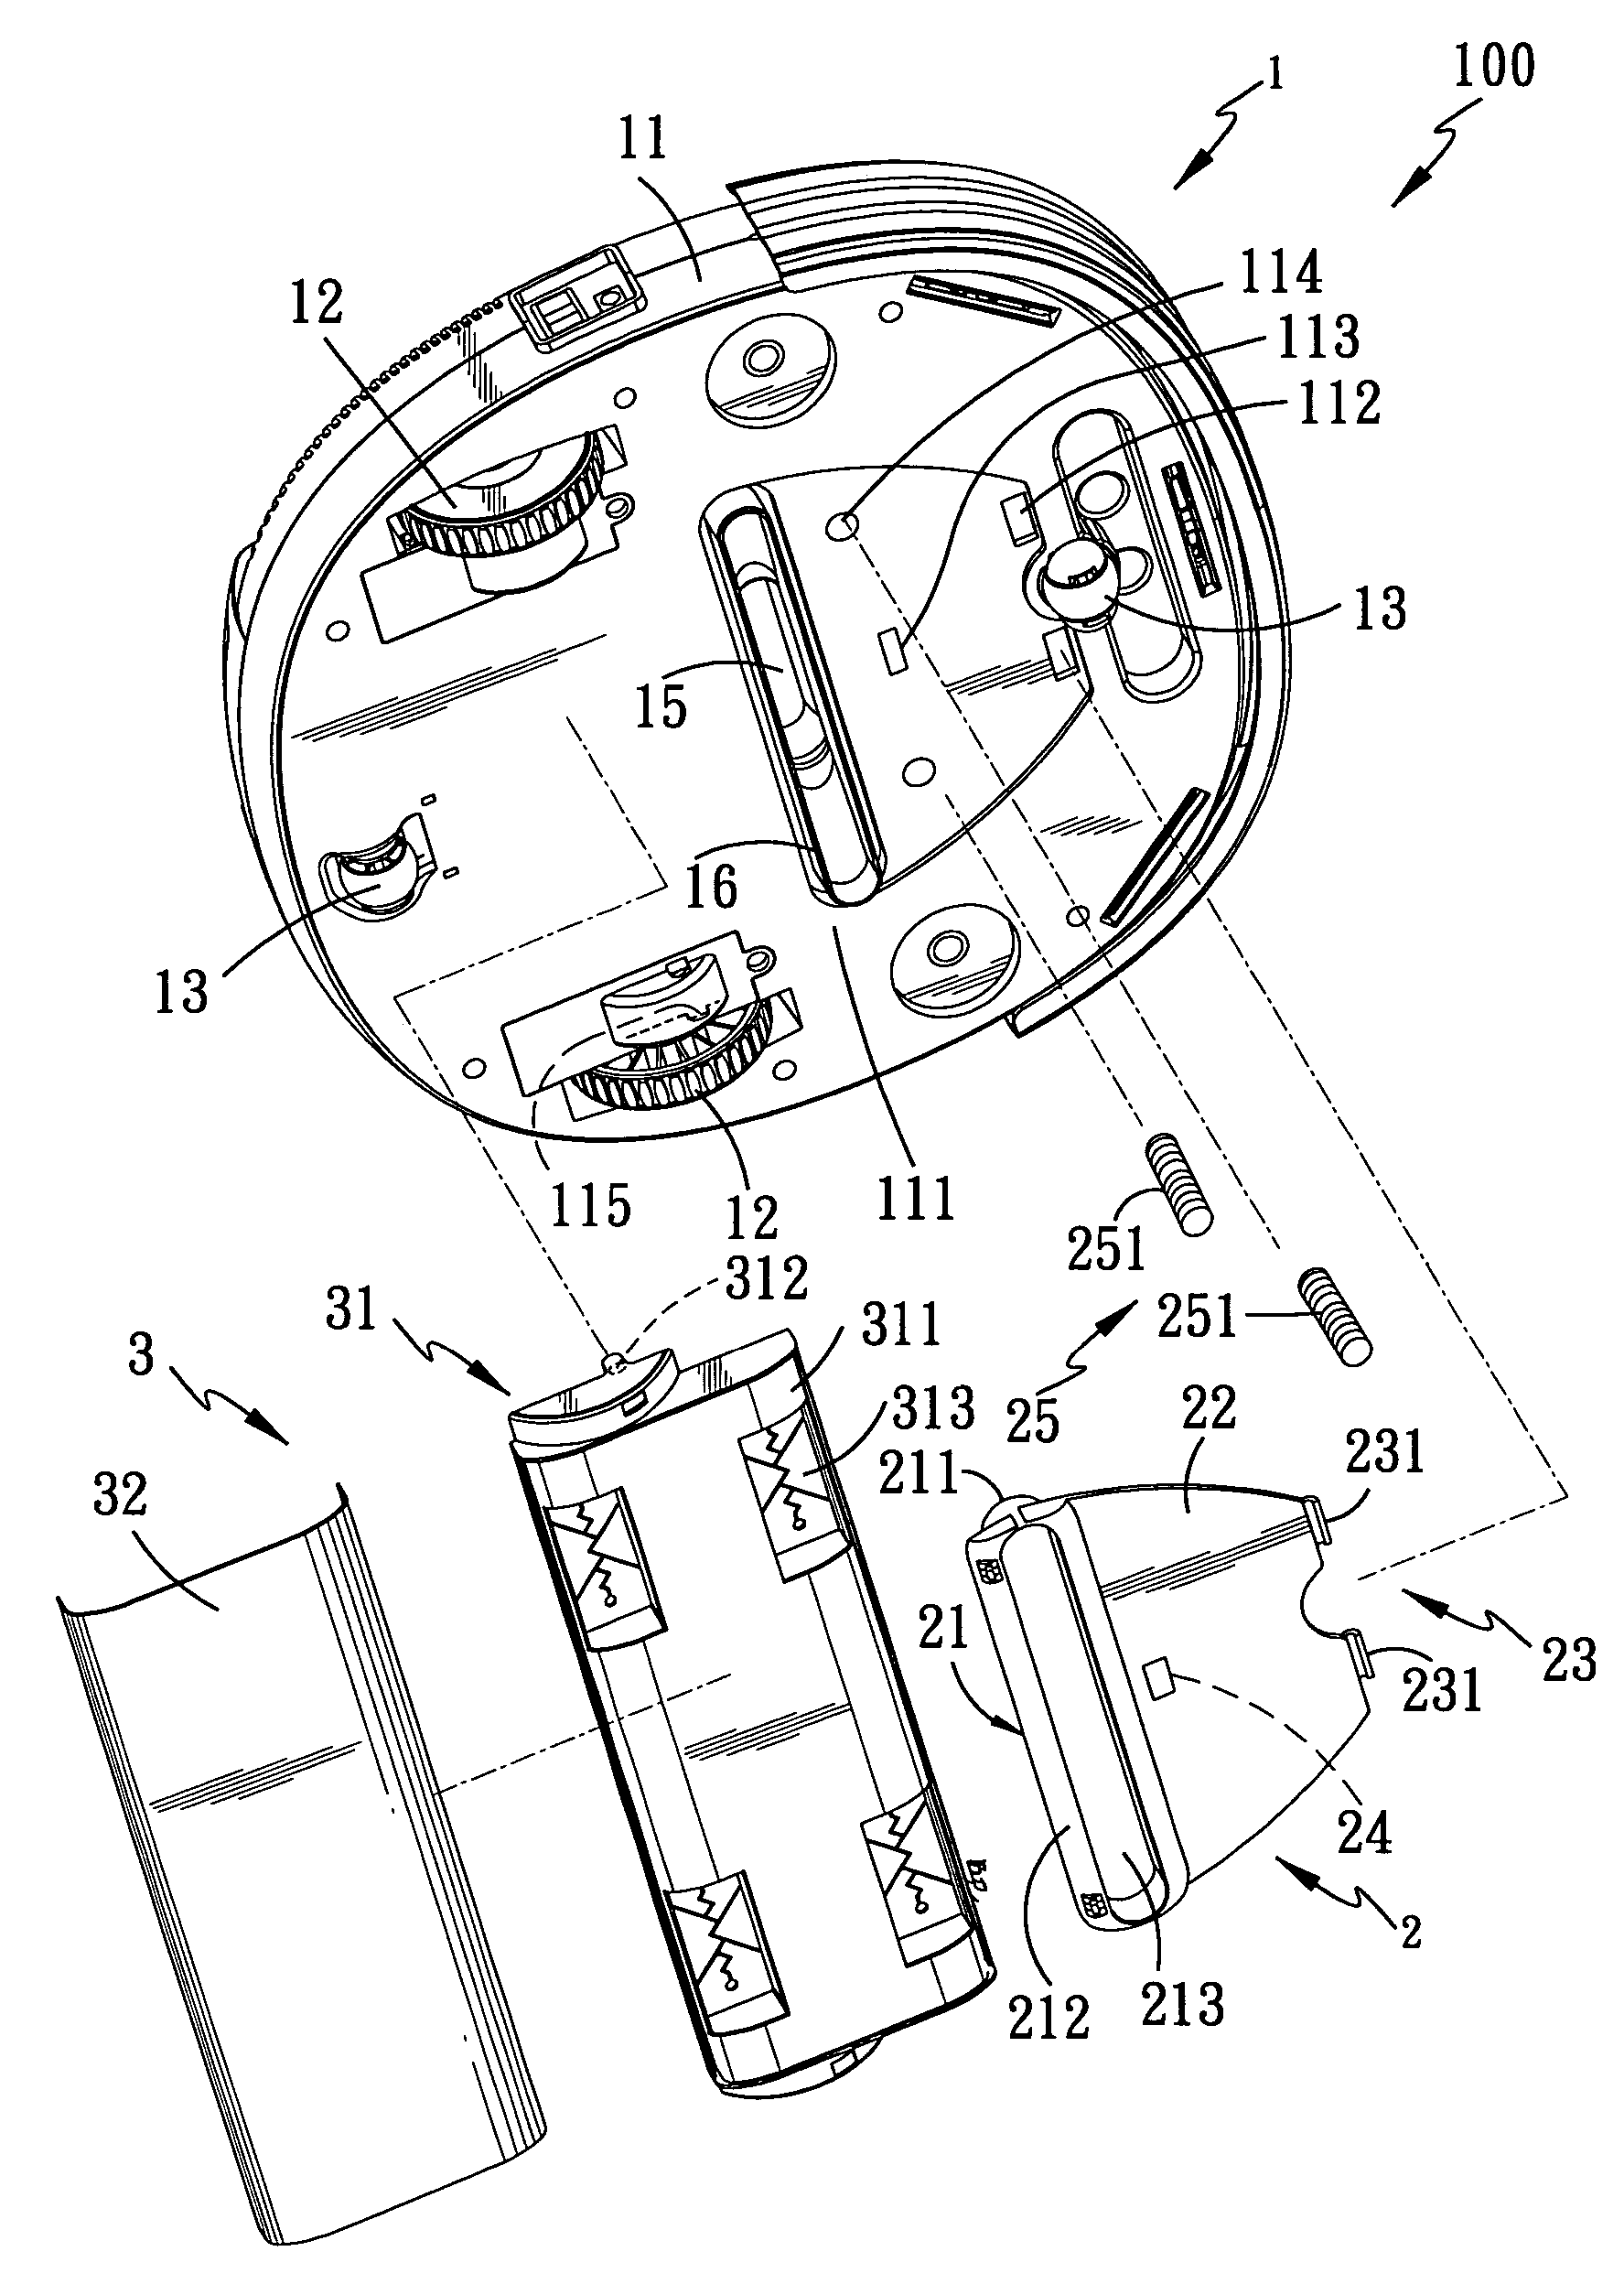 Self-moving vacuum cleaner with moveable intake nozzle